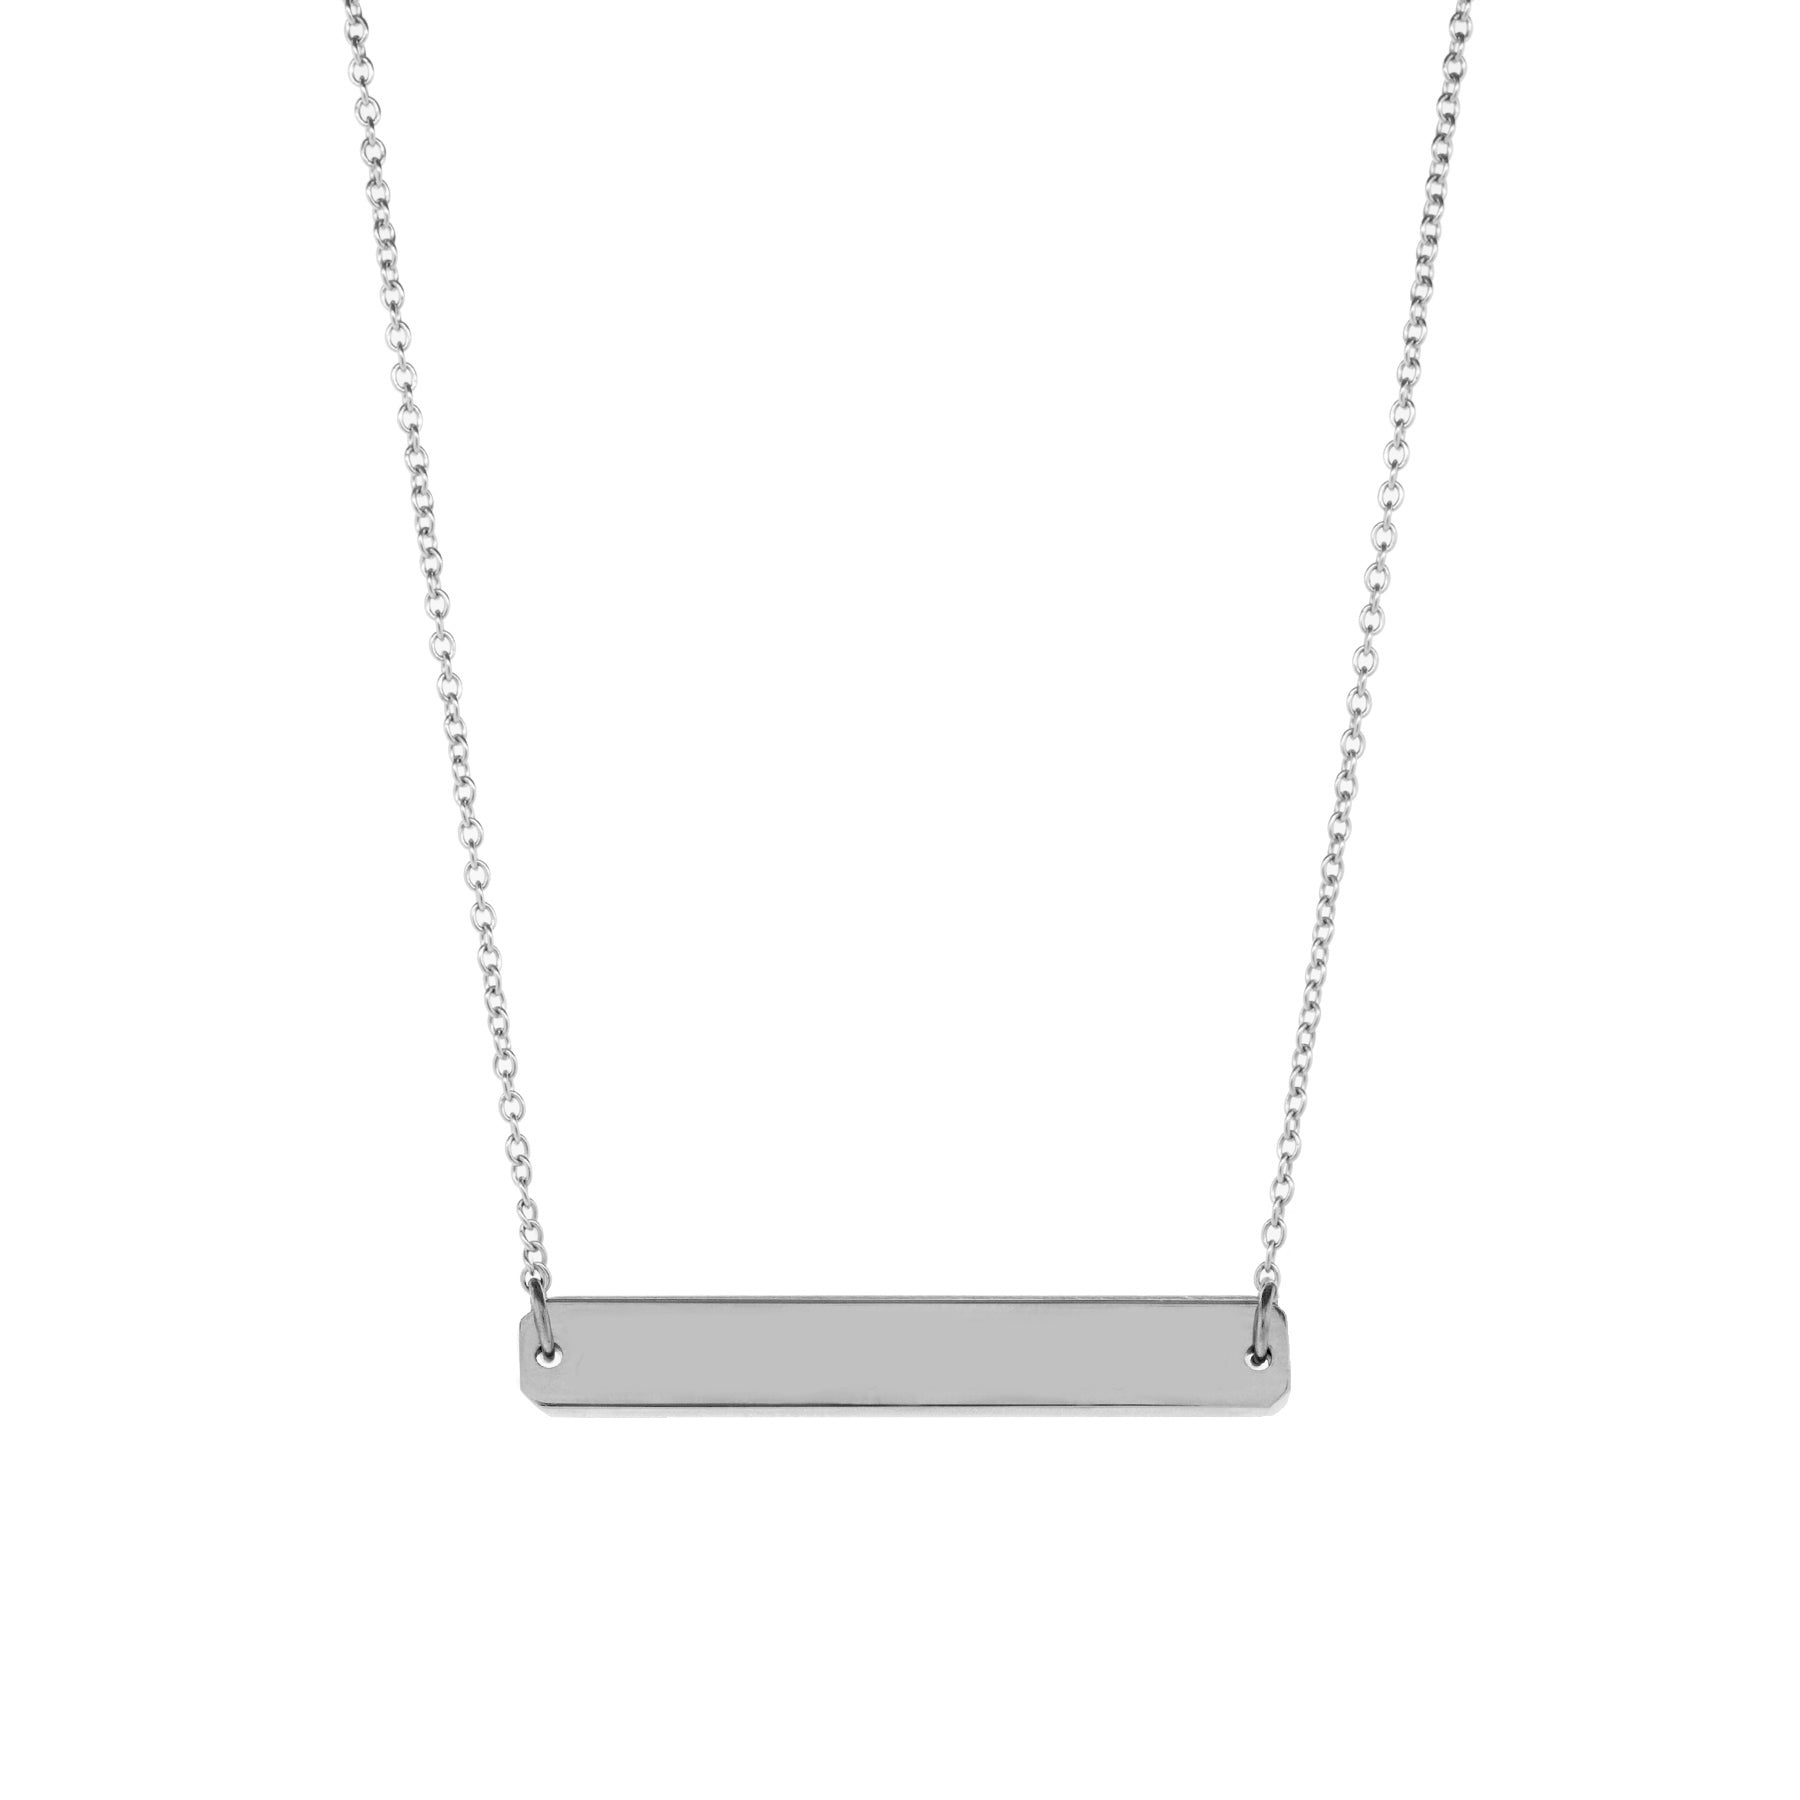 A straight horizontal gold pendant with inscription on a gold chain